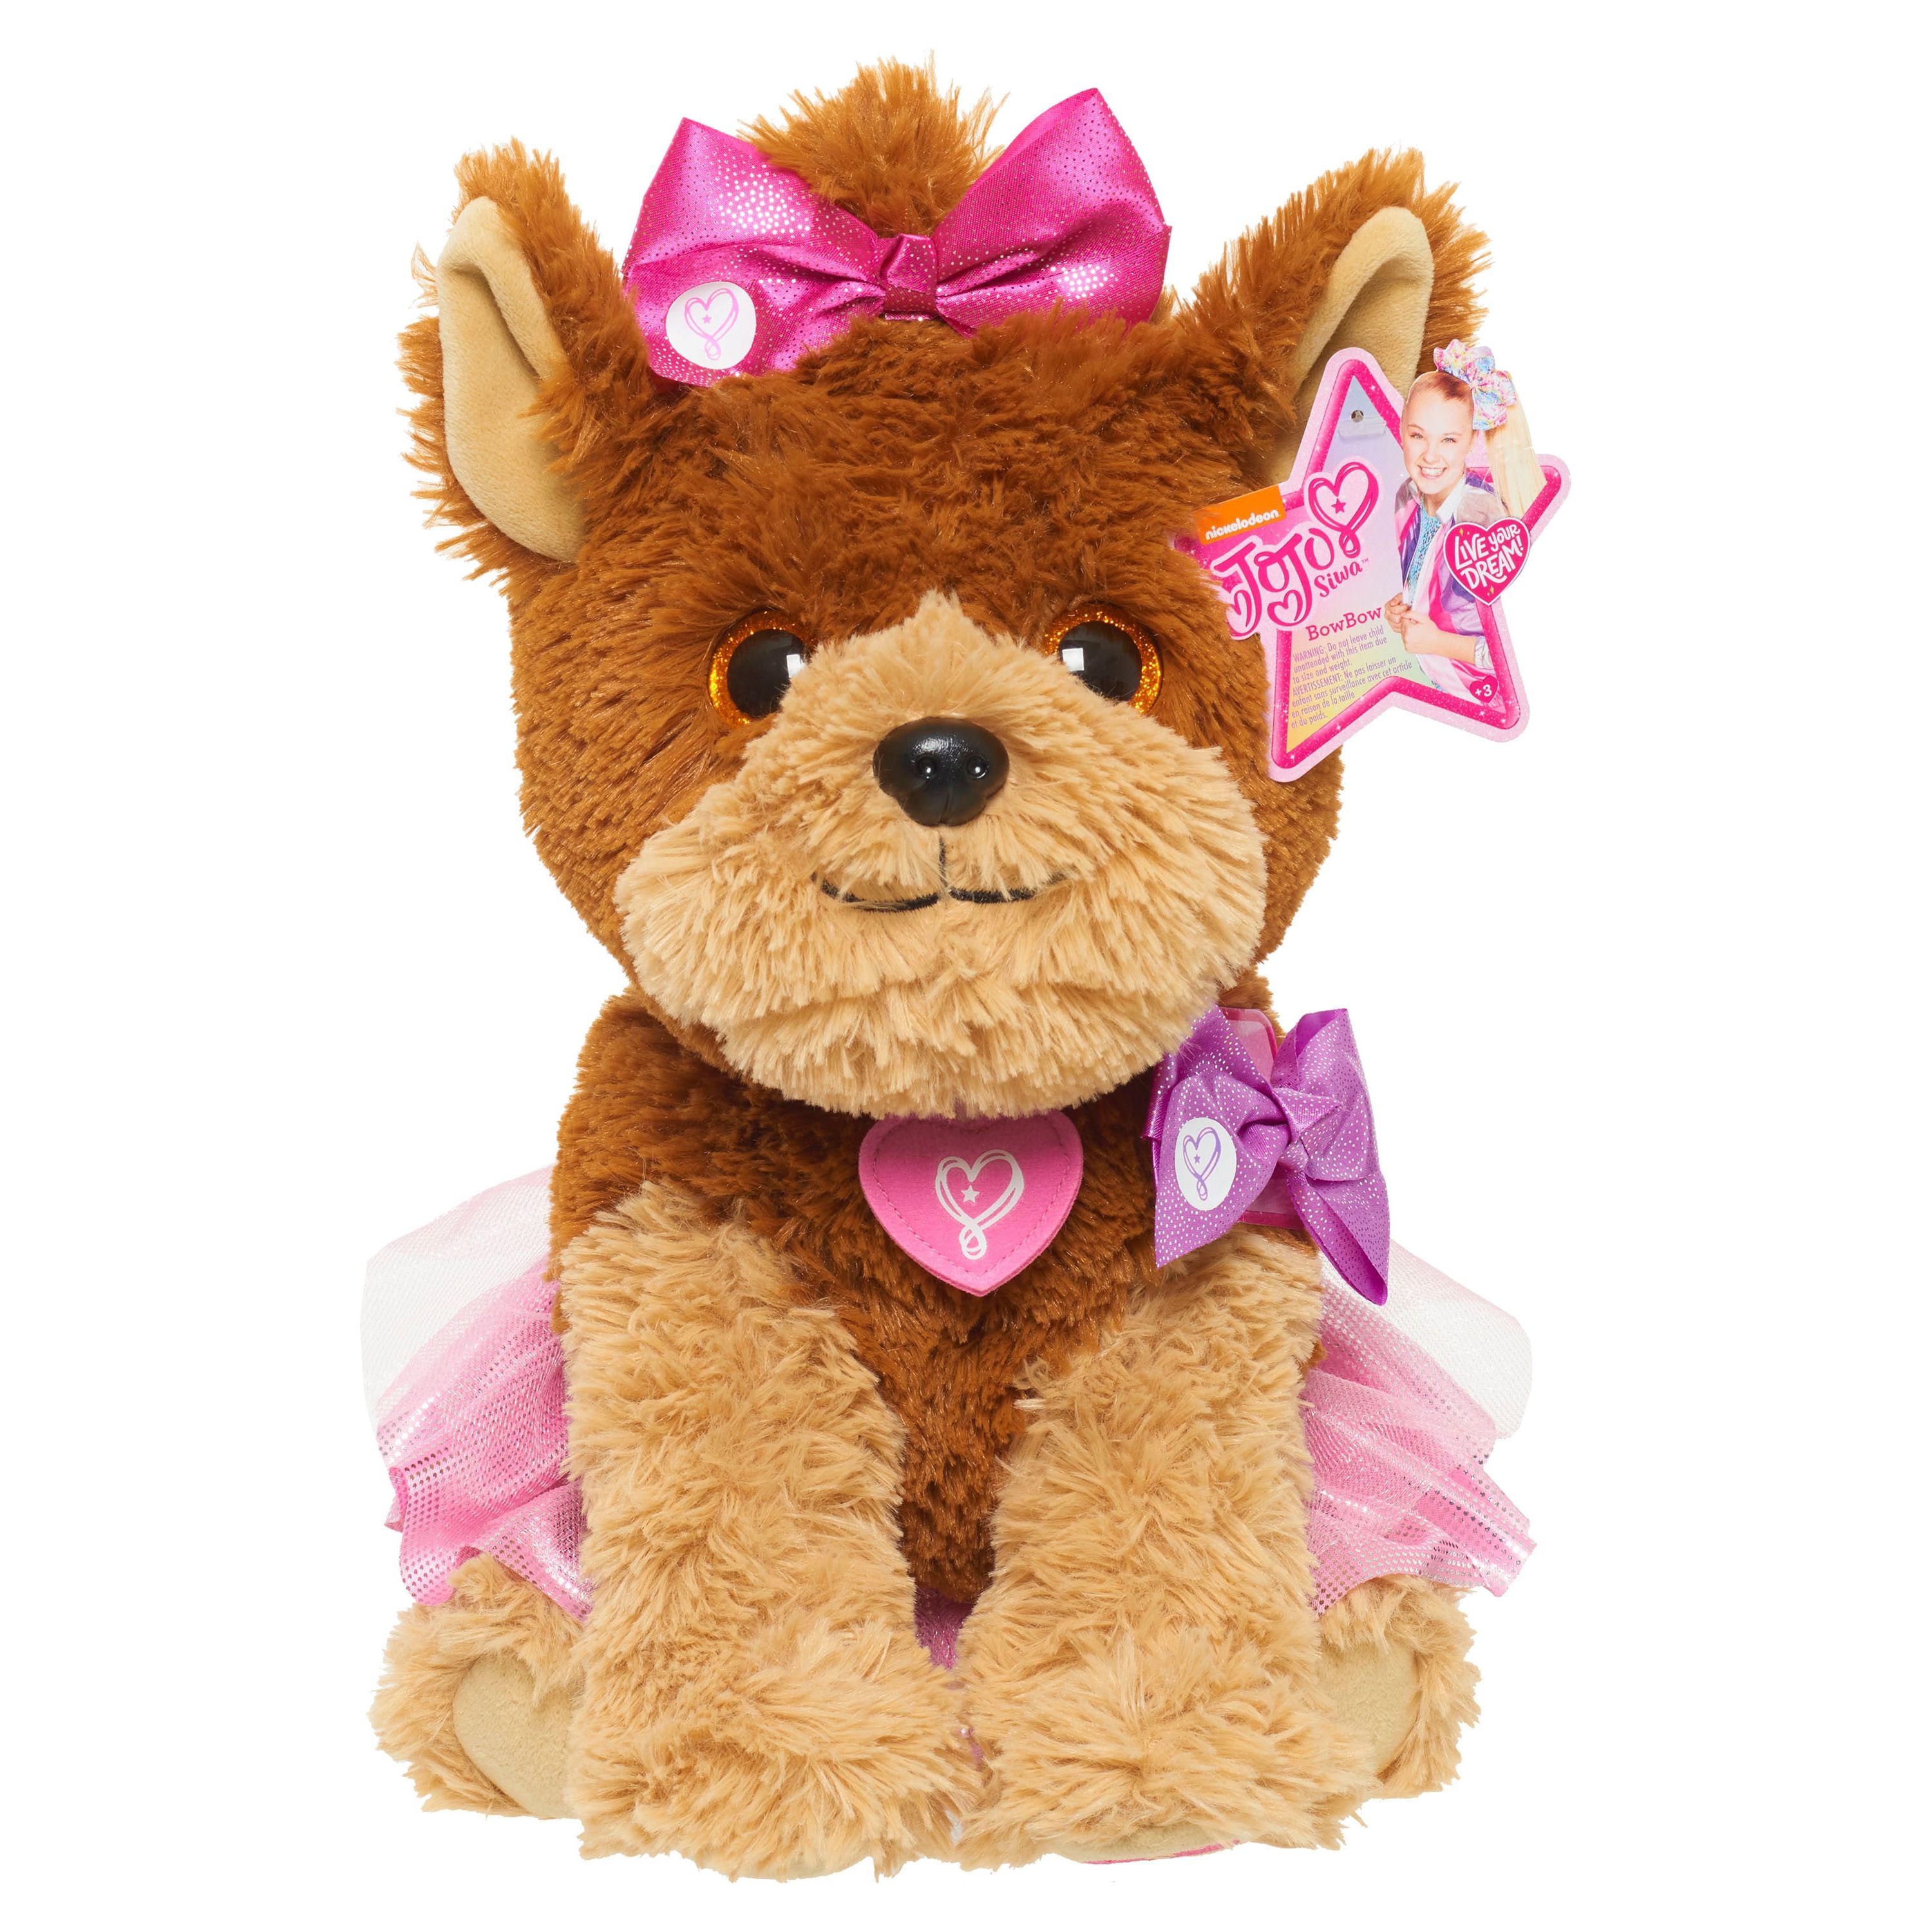 JoJo Siwa Jumbo BowBow Plush,  Kids Toys for Ages 3 Up, Gifts and Presents - image 4 of 4